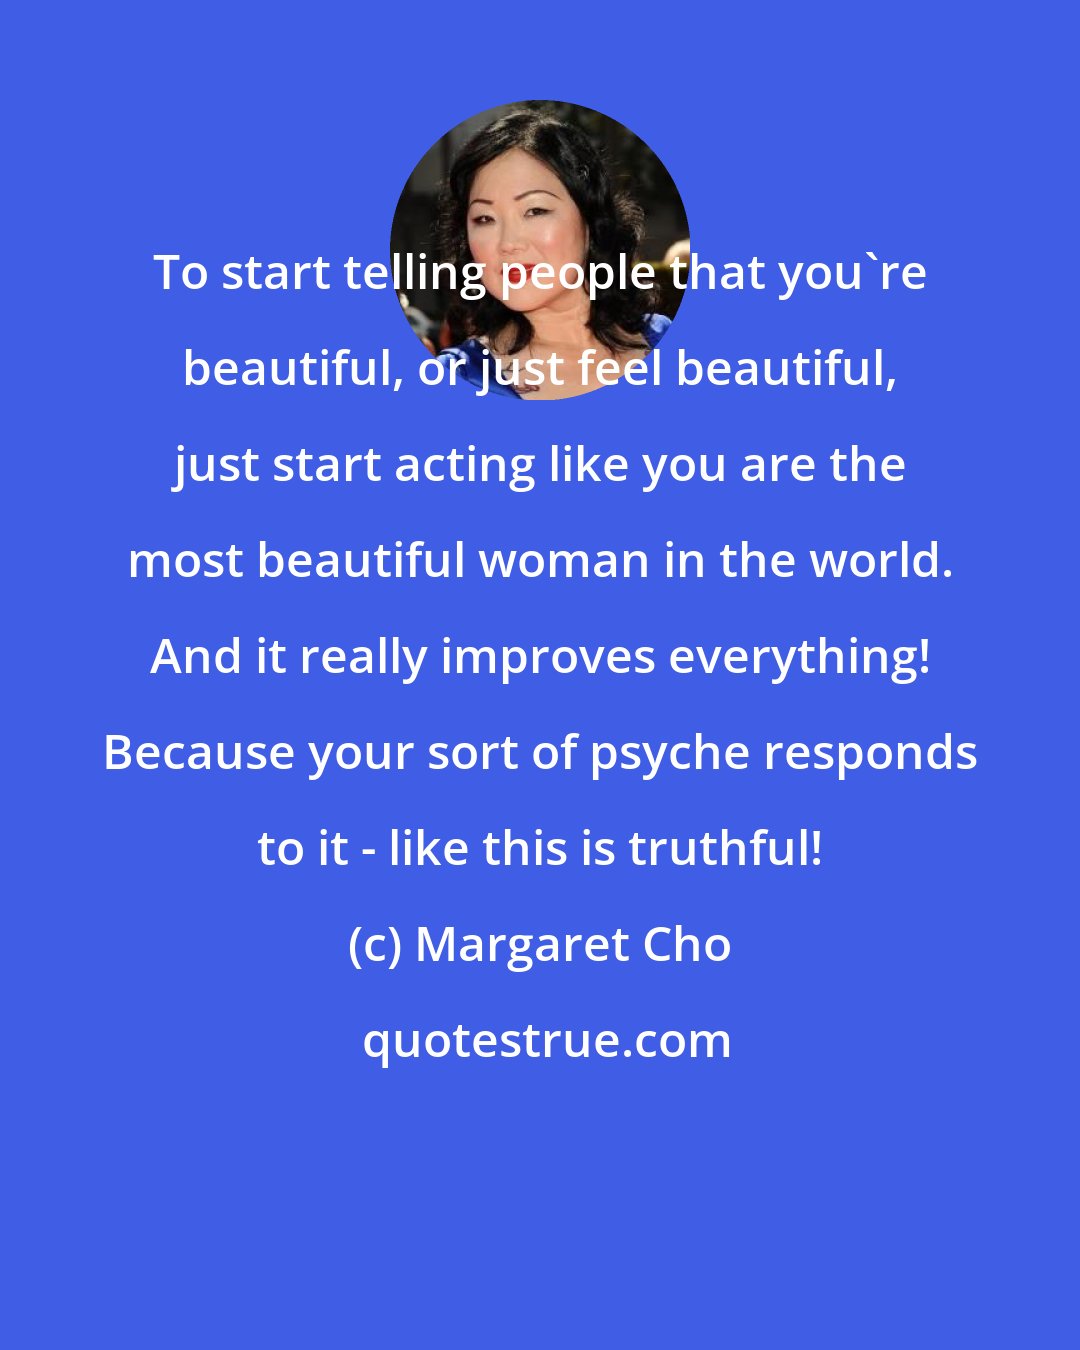 Margaret Cho: To start telling people that you're beautiful, or just feel beautiful, just start acting like you are the most beautiful woman in the world. And it really improves everything! Because your sort of psyche responds to it - like this is truthful!